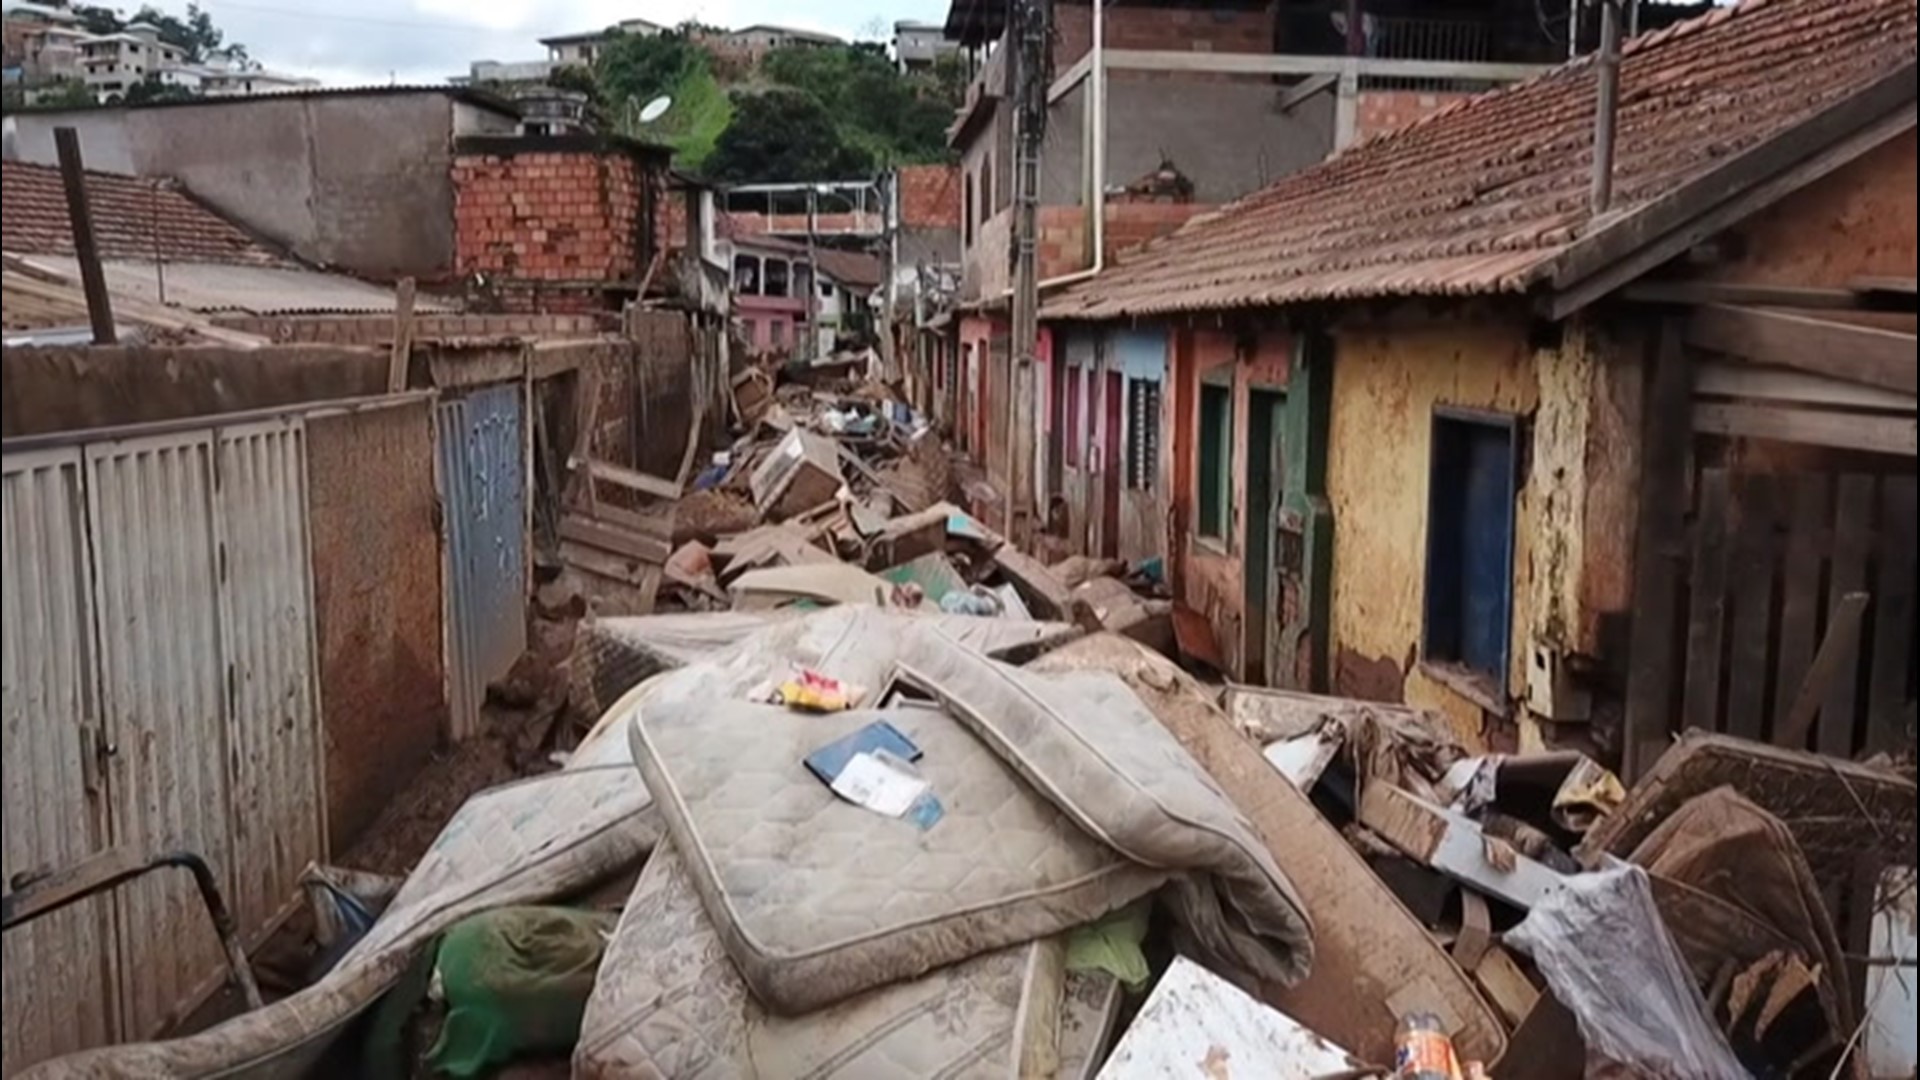 The streets of Raposos, Minas Gerais, Brazil, were coated in mud and debris on Jan. 28 after the worst floods the area has endured since records have been kept swept through the area.